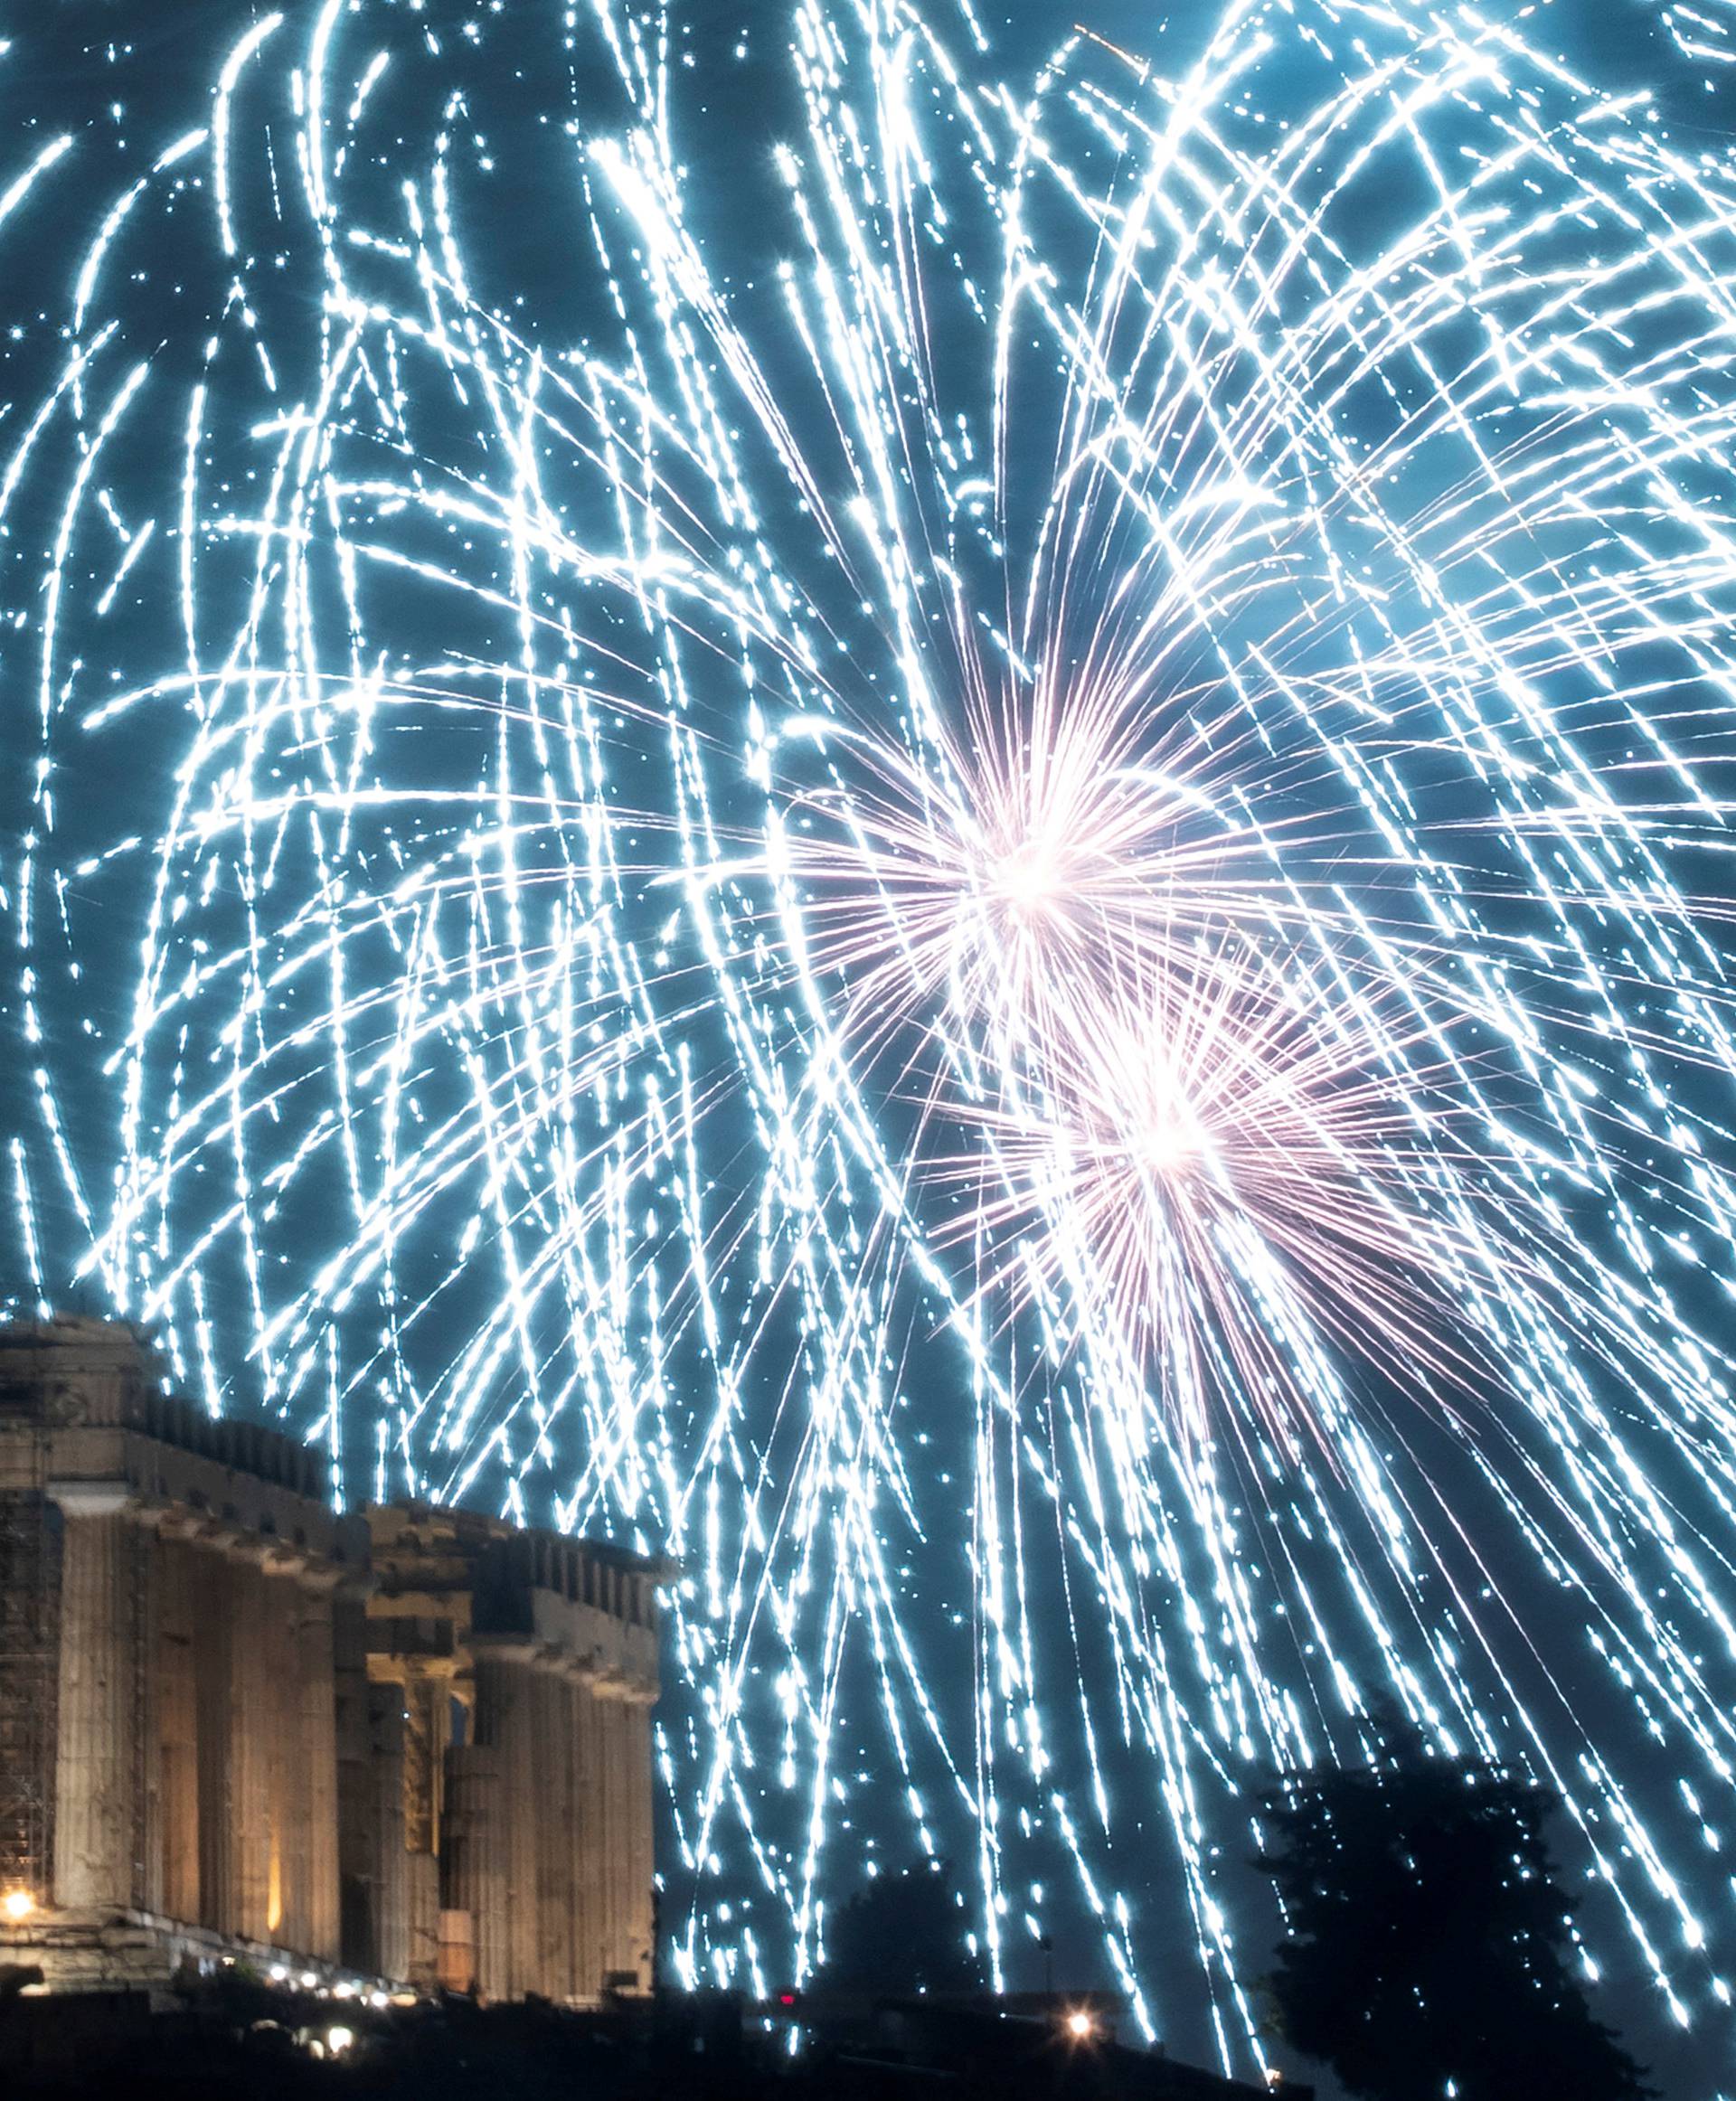 Fireworks explode over the ancient Parthenon temple atop the Acropolis hill during New Year's day celebrations in Athens